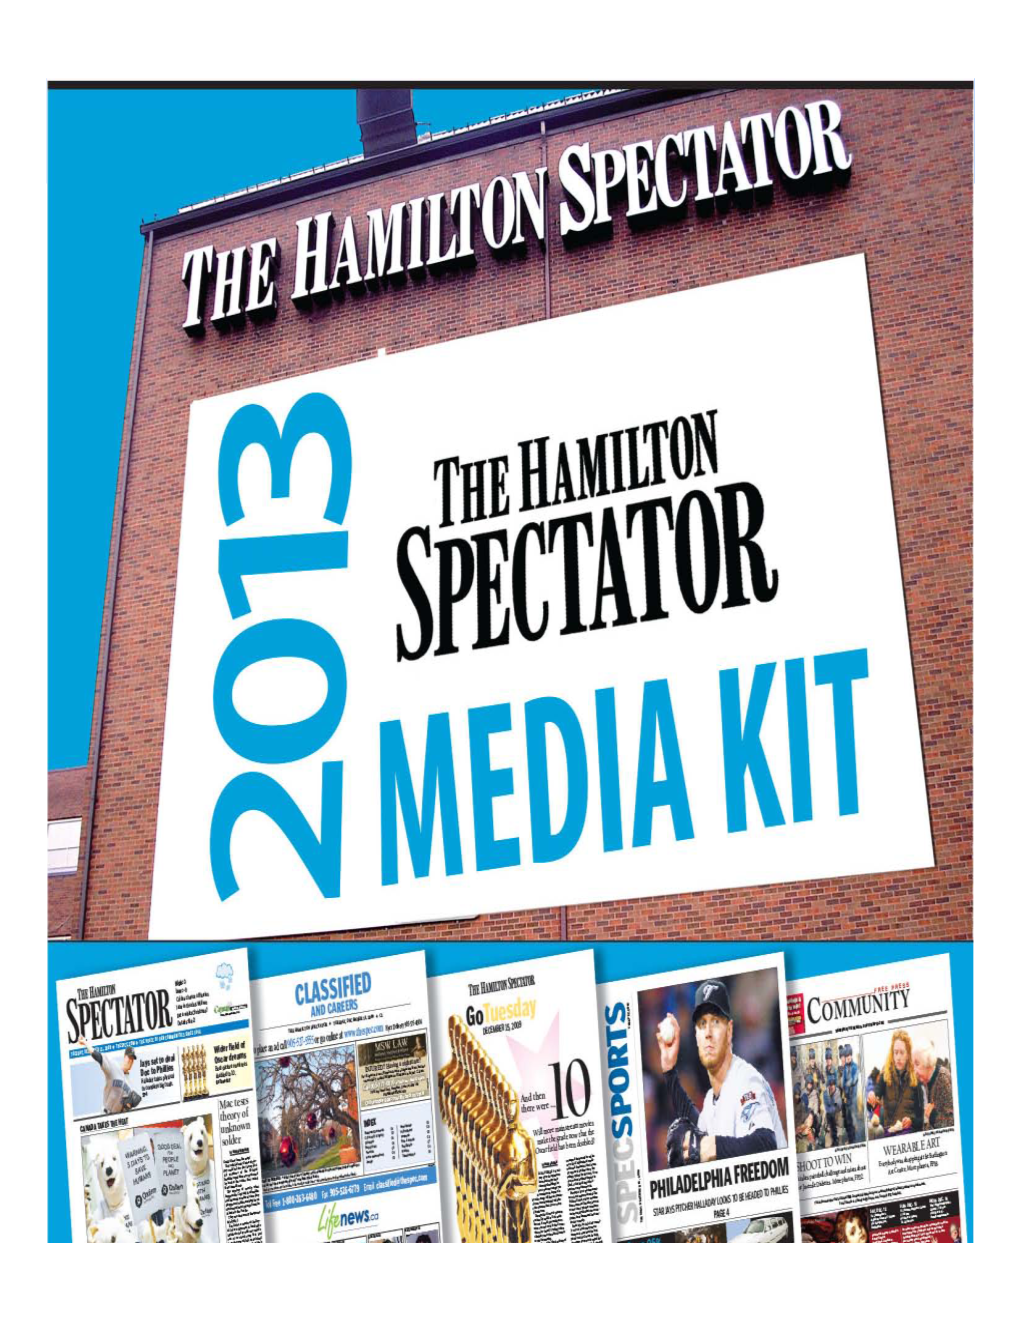 The Hamilton Spectator Media Kit the Hamilton CMA Is Diverse, Strong and Growing!